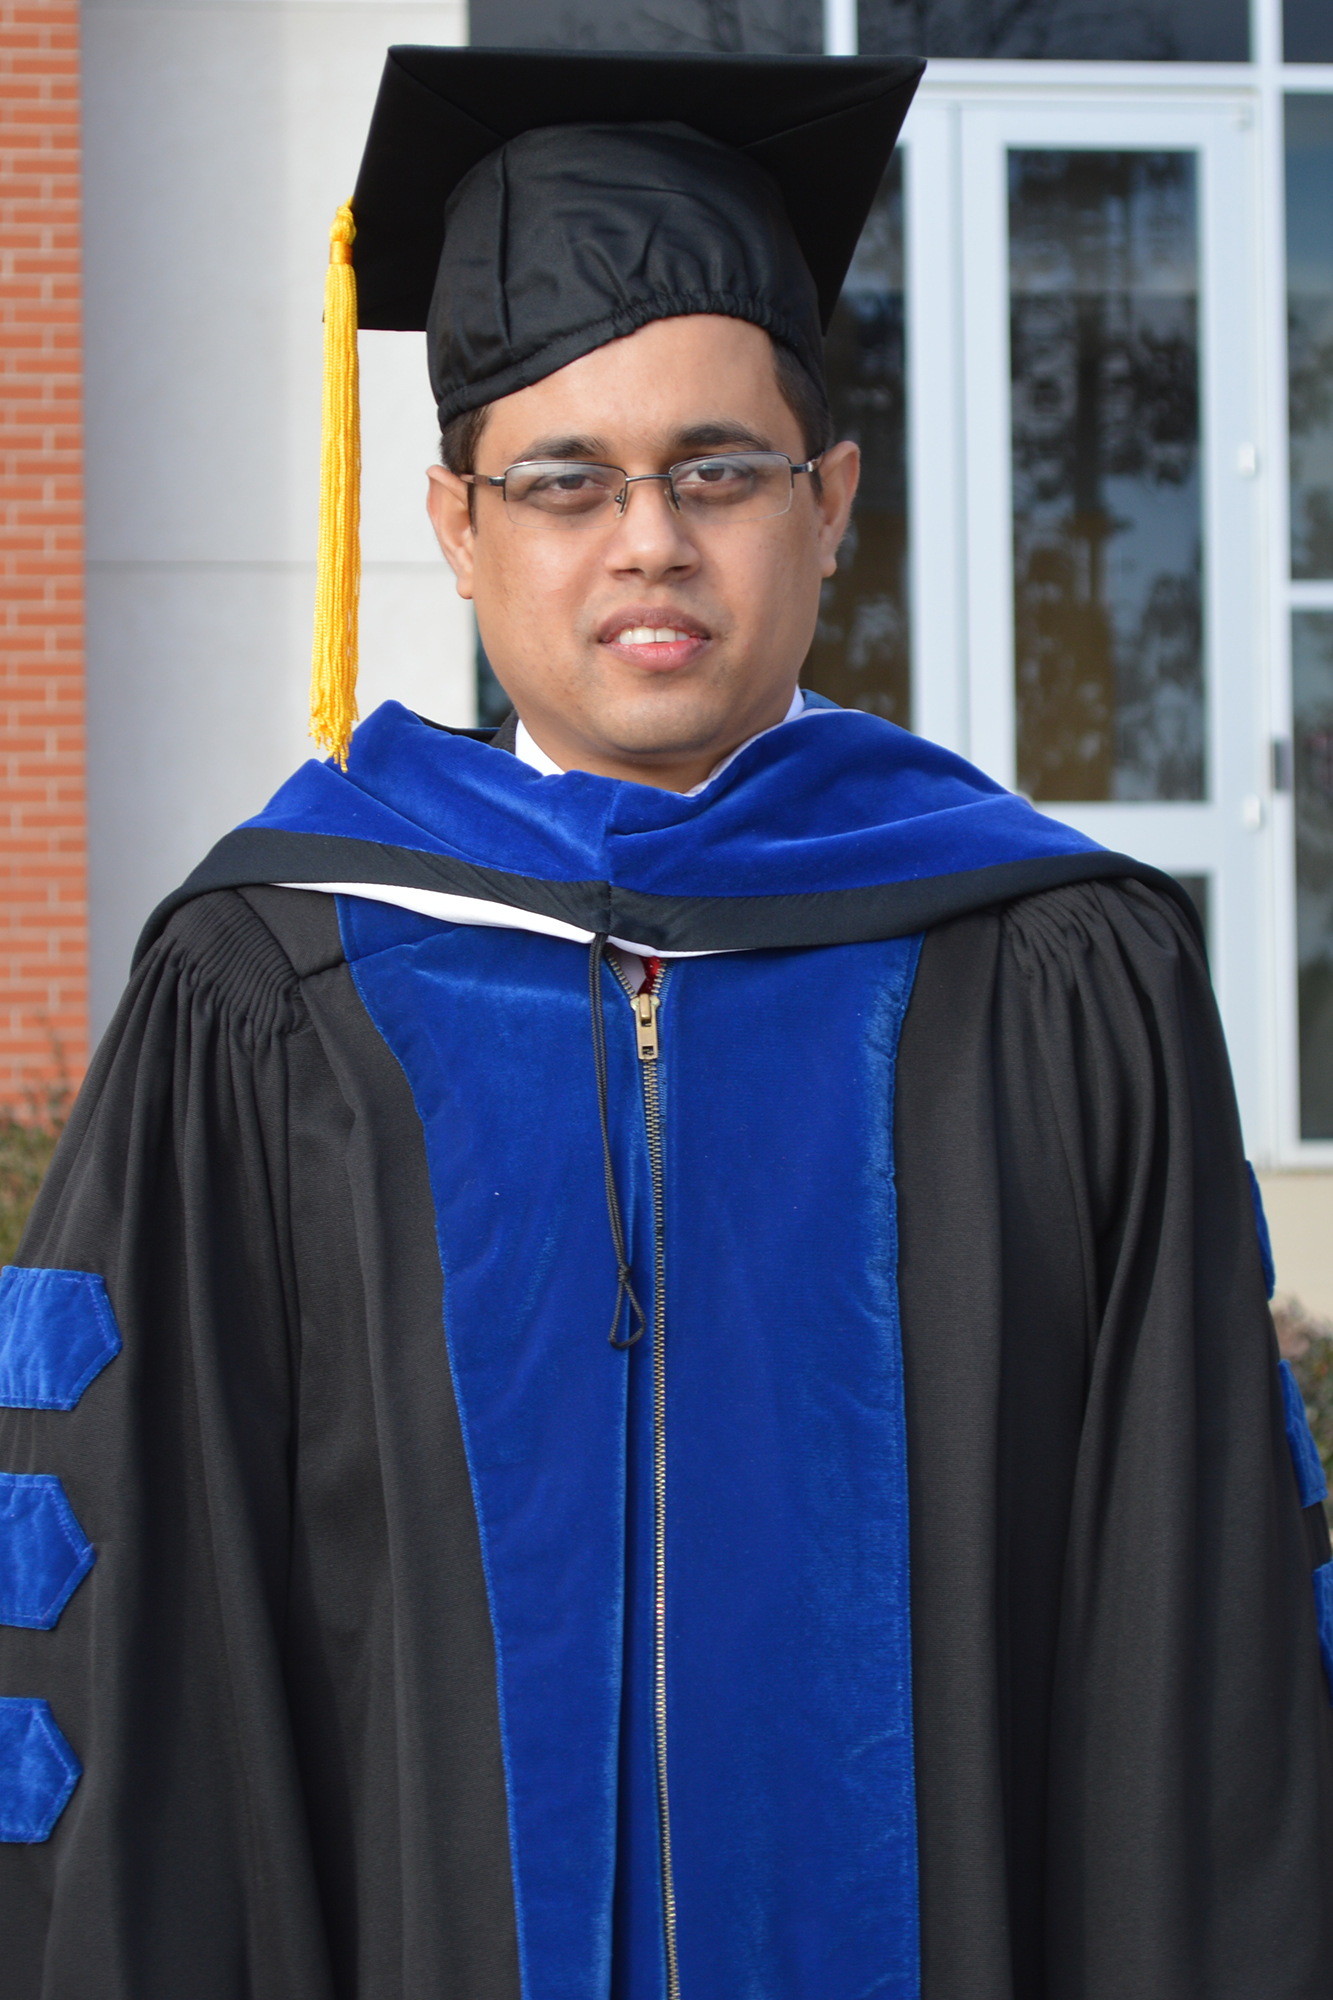 Adesh Subedi graduated with his engineering/applied physics doctorate from Mississippi State University in December 2014.